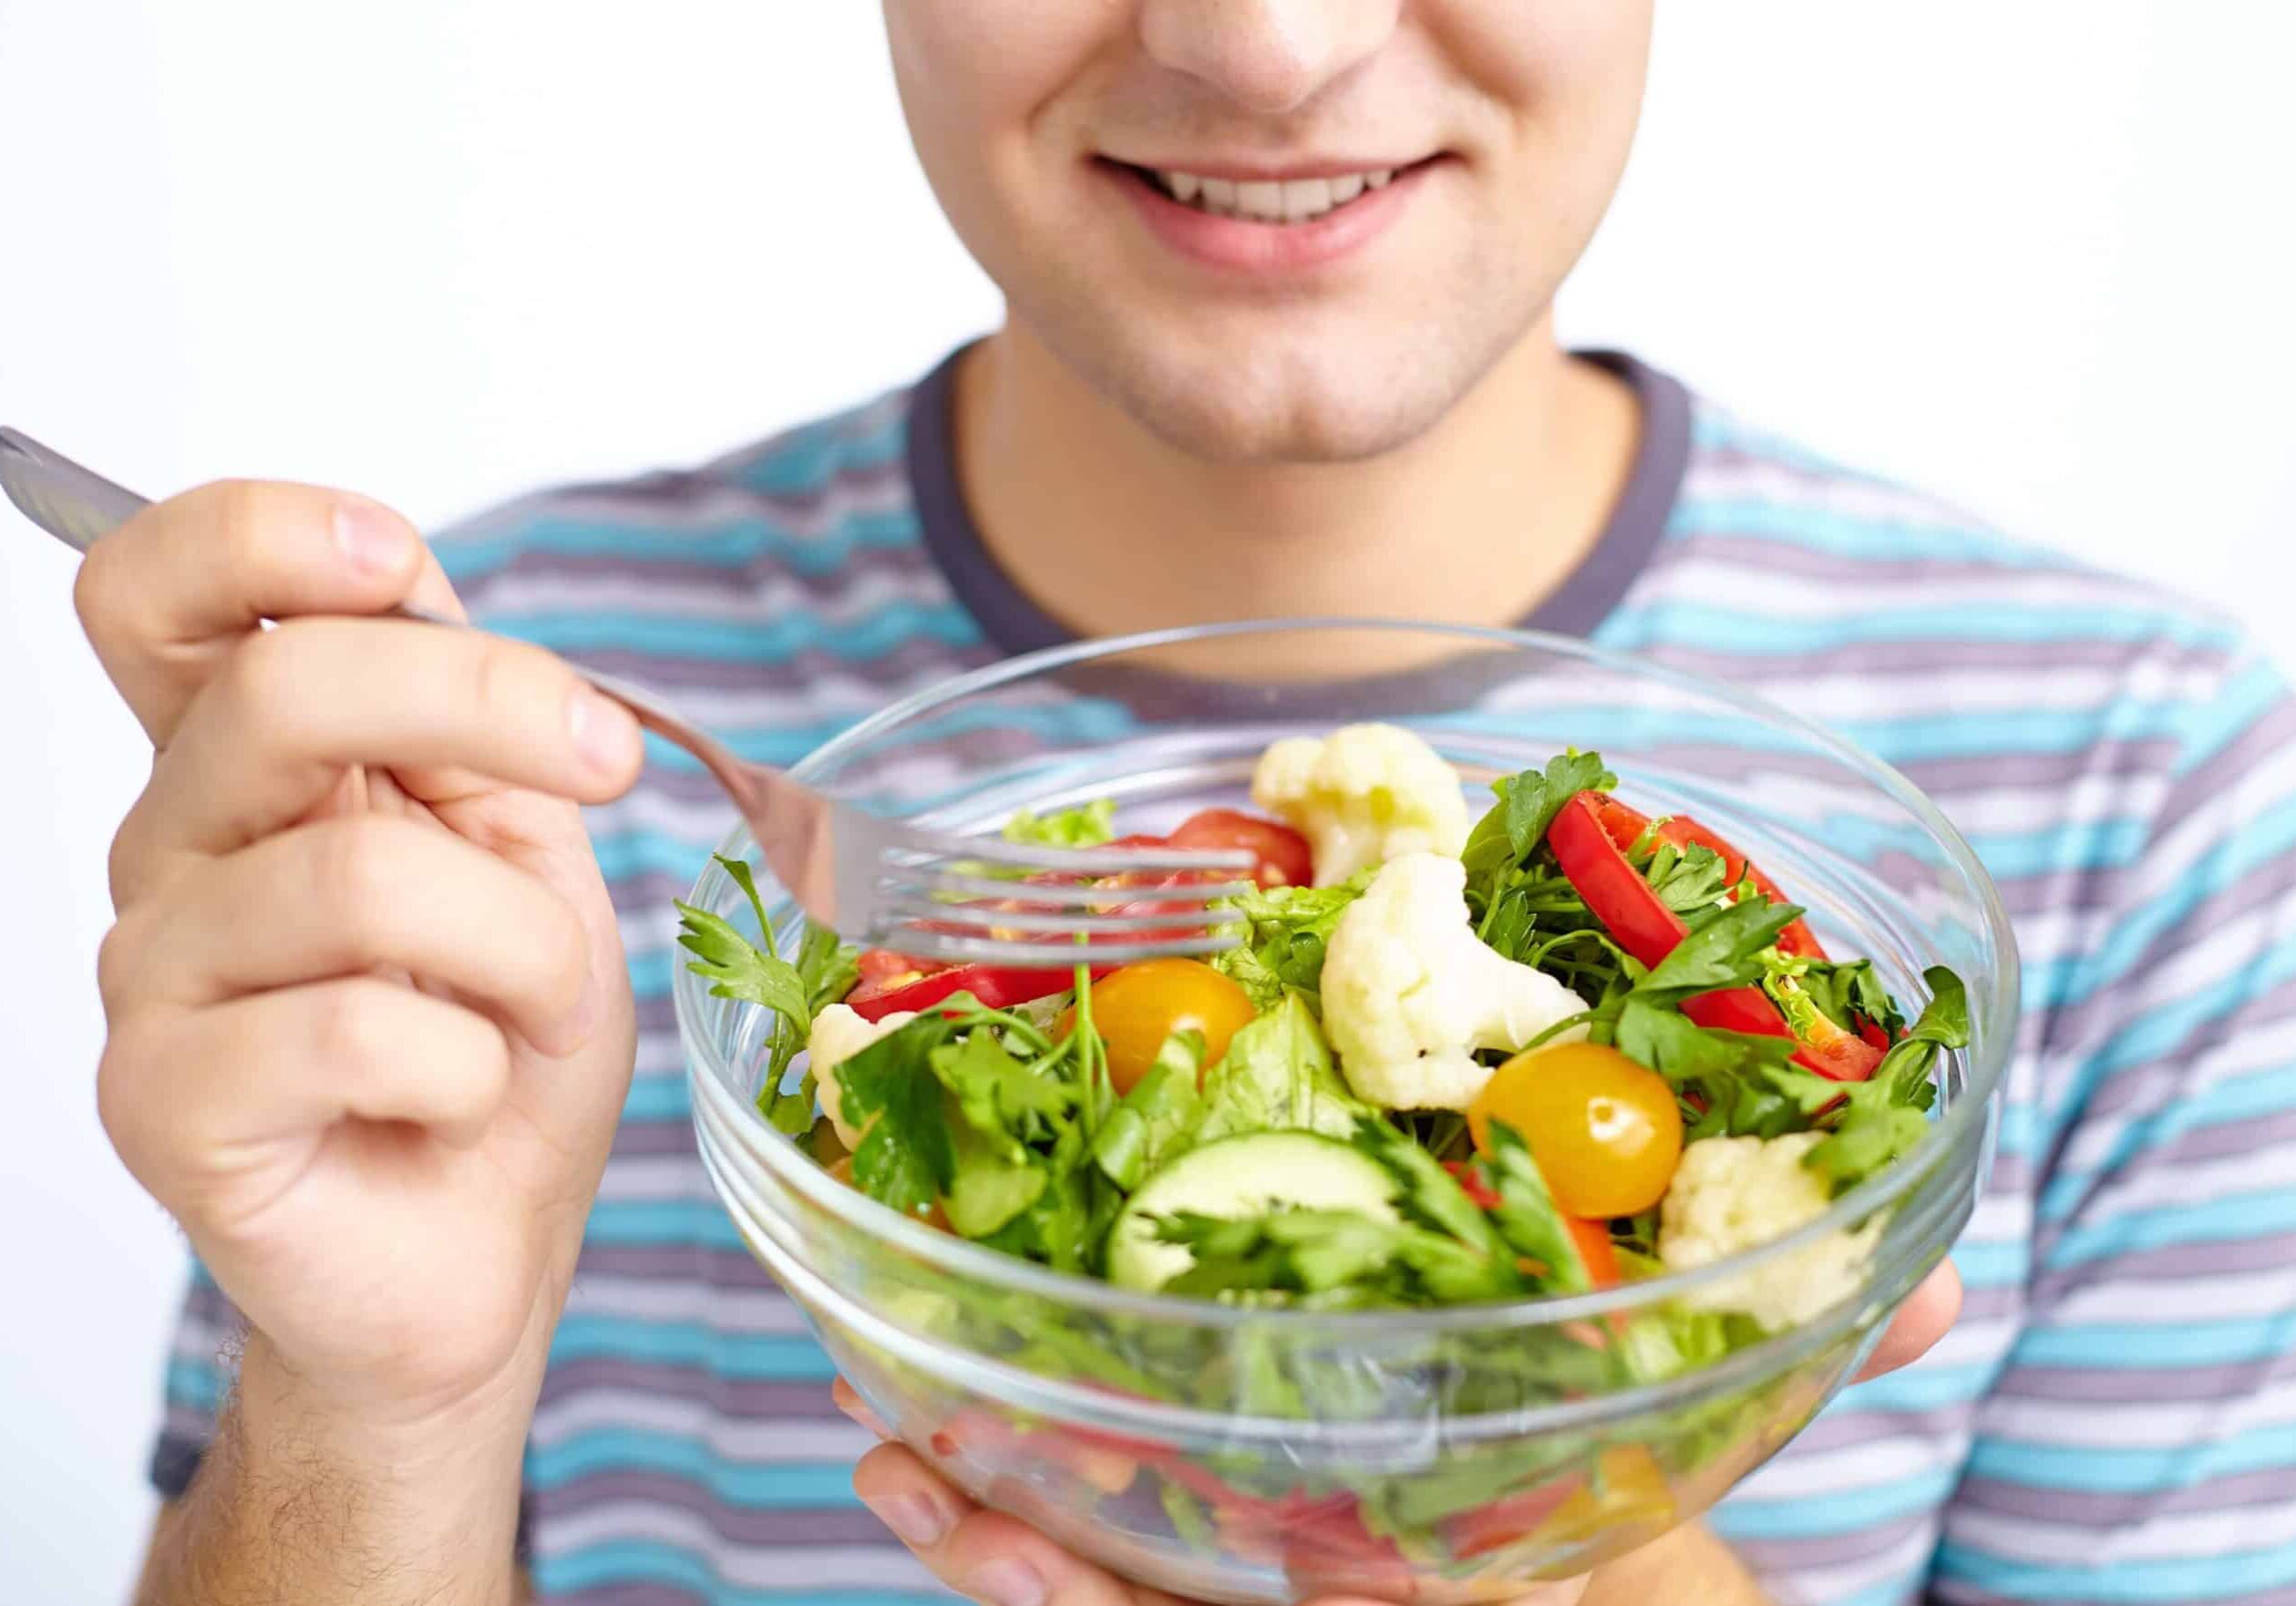 close-up-of-fresh-vegetable-salad-being-eaten-by-man